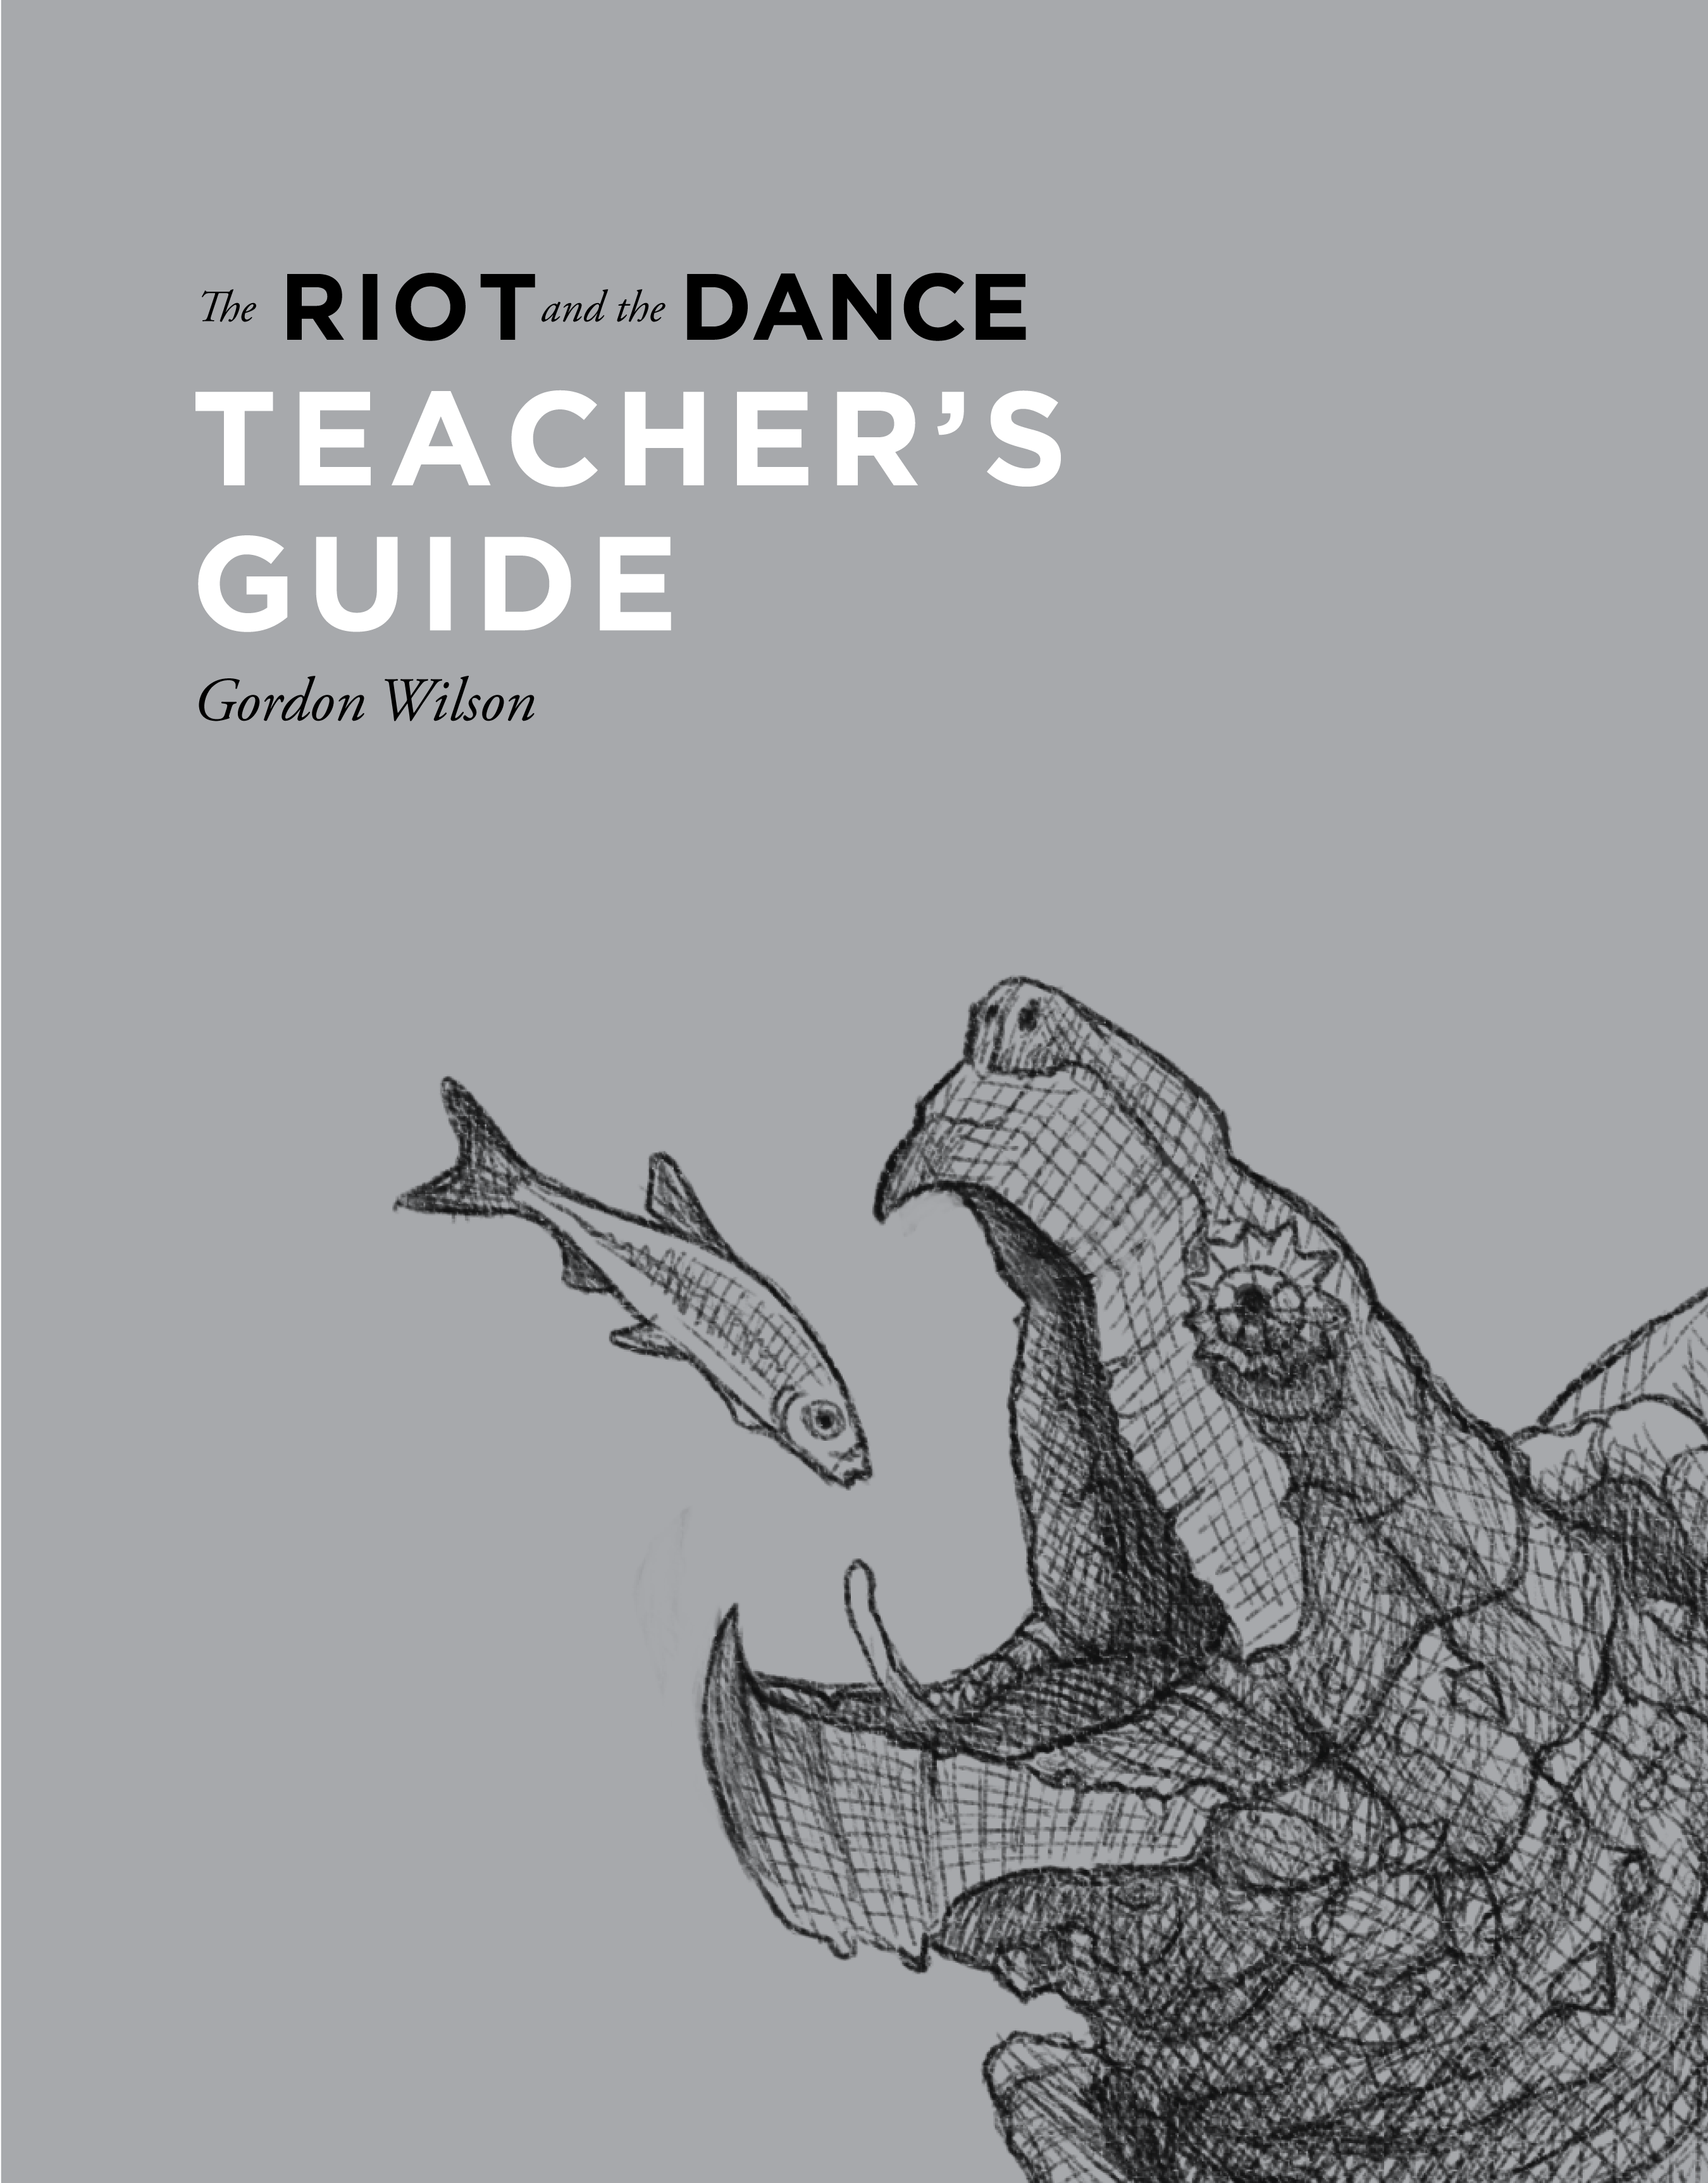 Foundational Biology - The Riot and the Dance